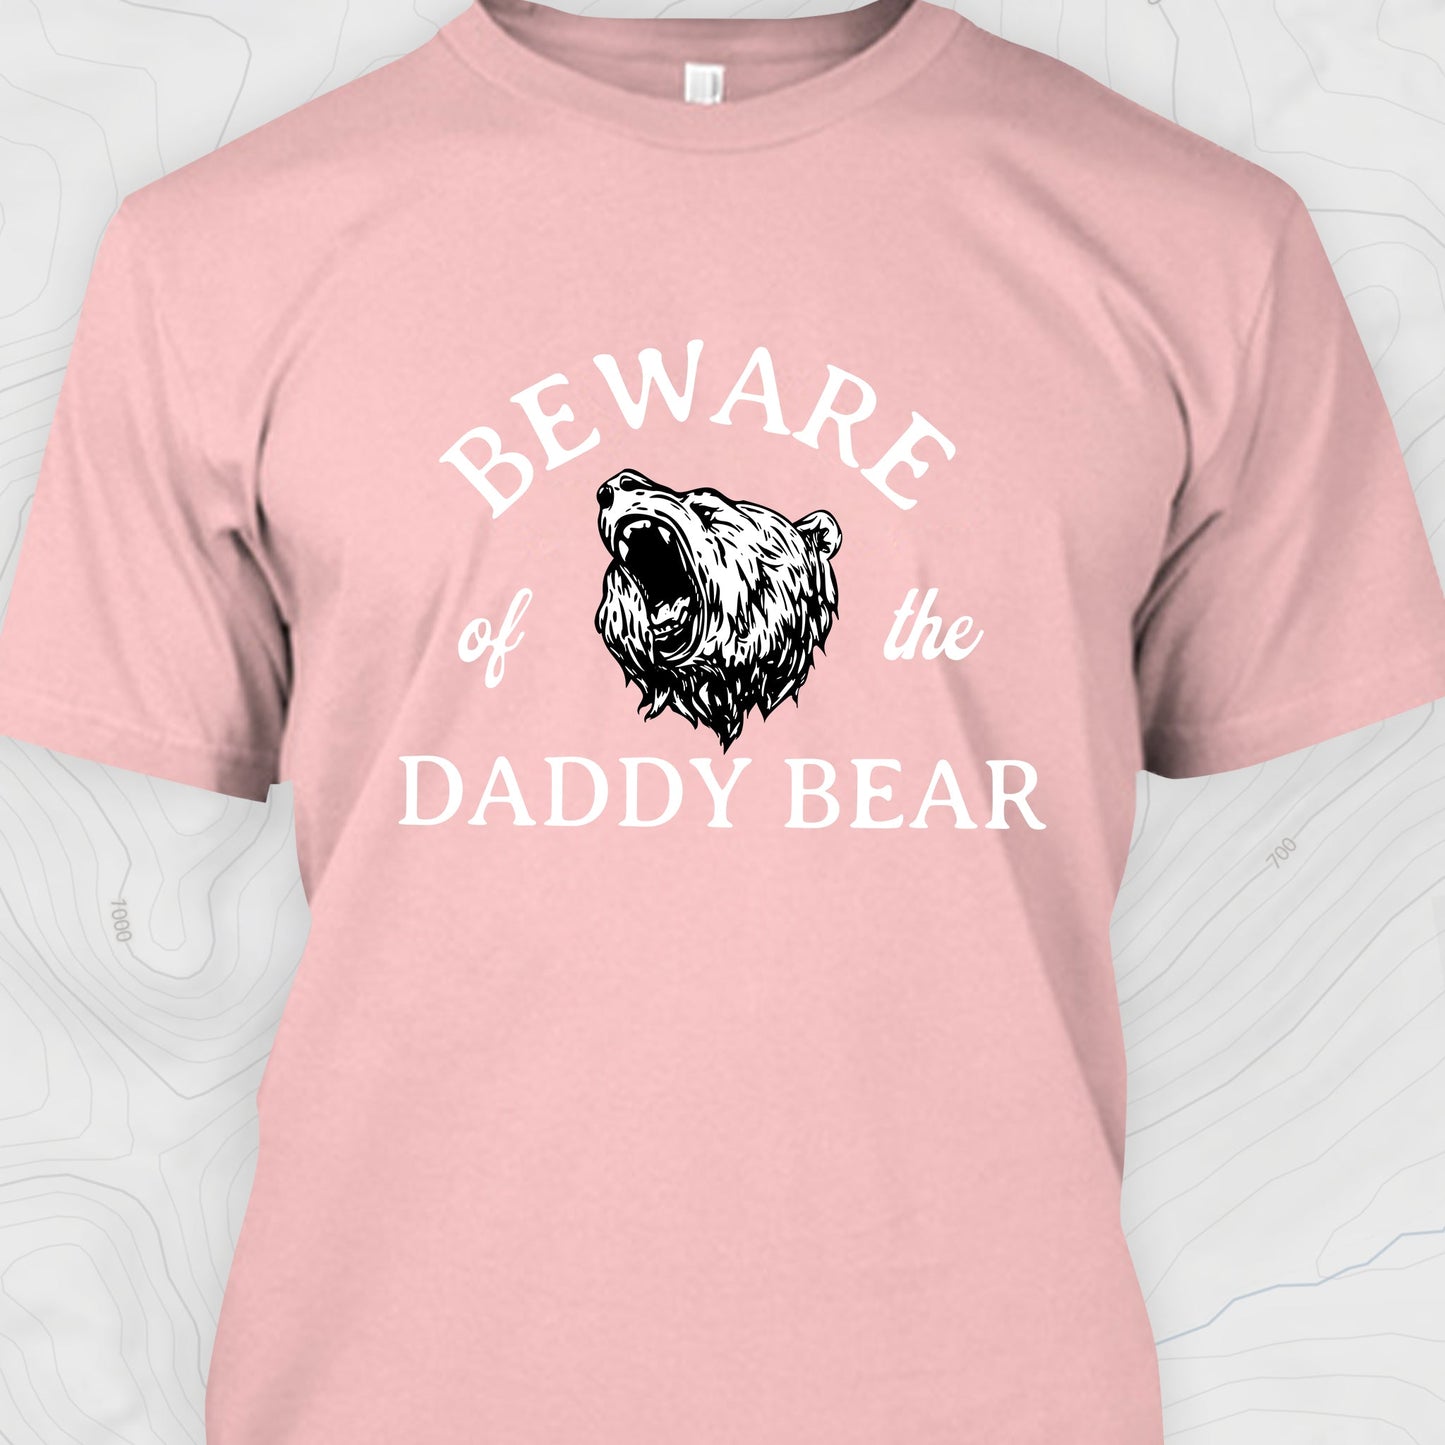 Beware of the Daddy Bear